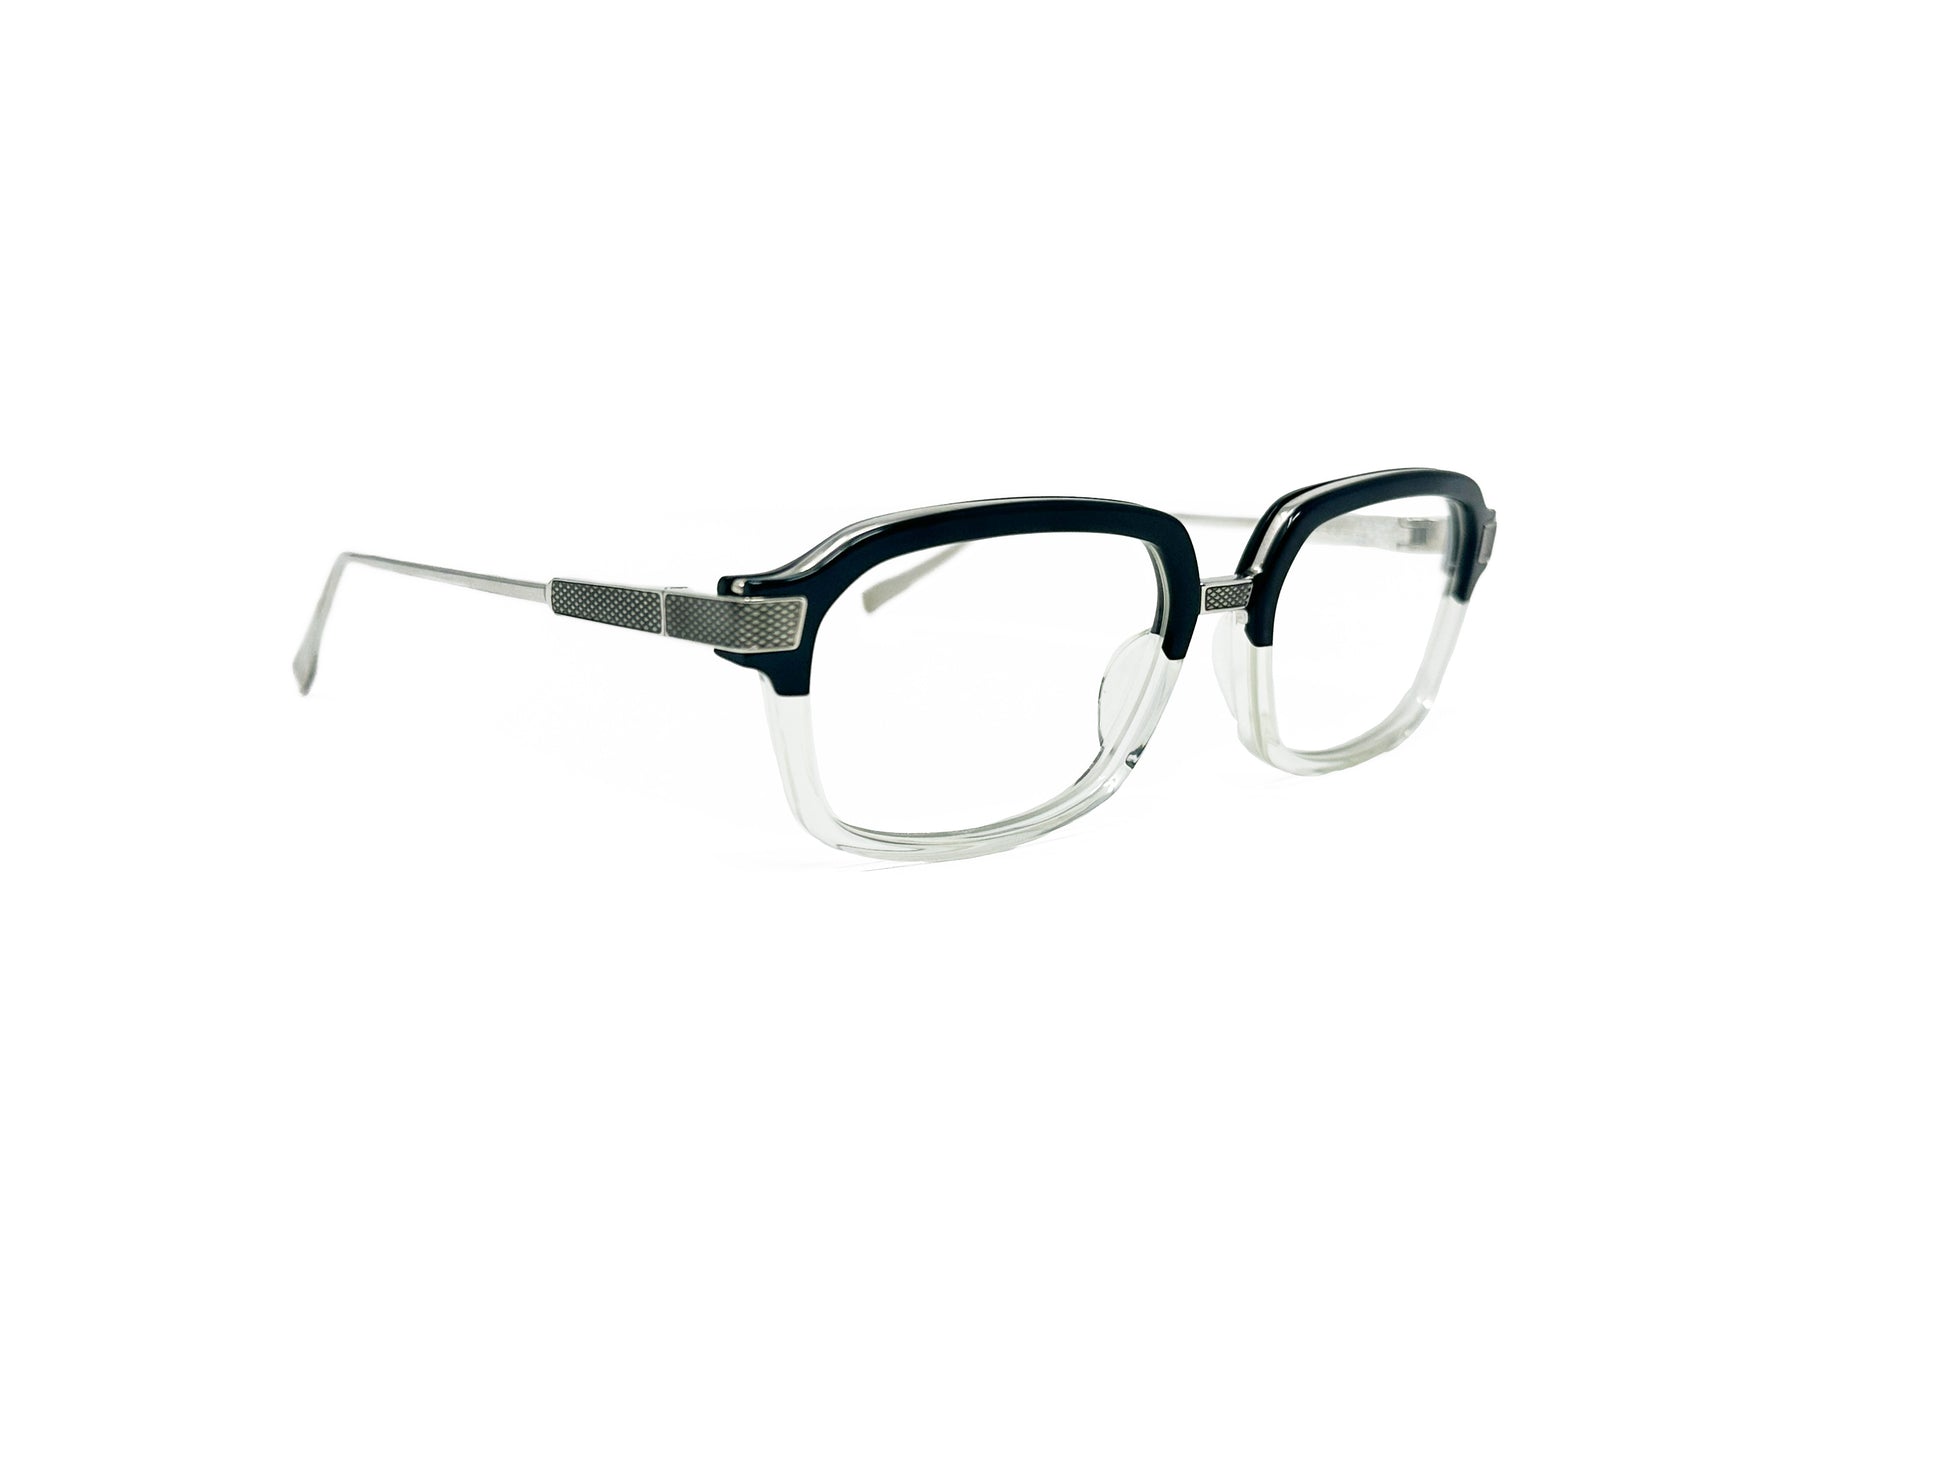 Dita square optical frame, acetate front with wire temples. Front of the frame is black on top and transparent on bottom. Model: Lexington. Color: C - Black and clear. Side view.